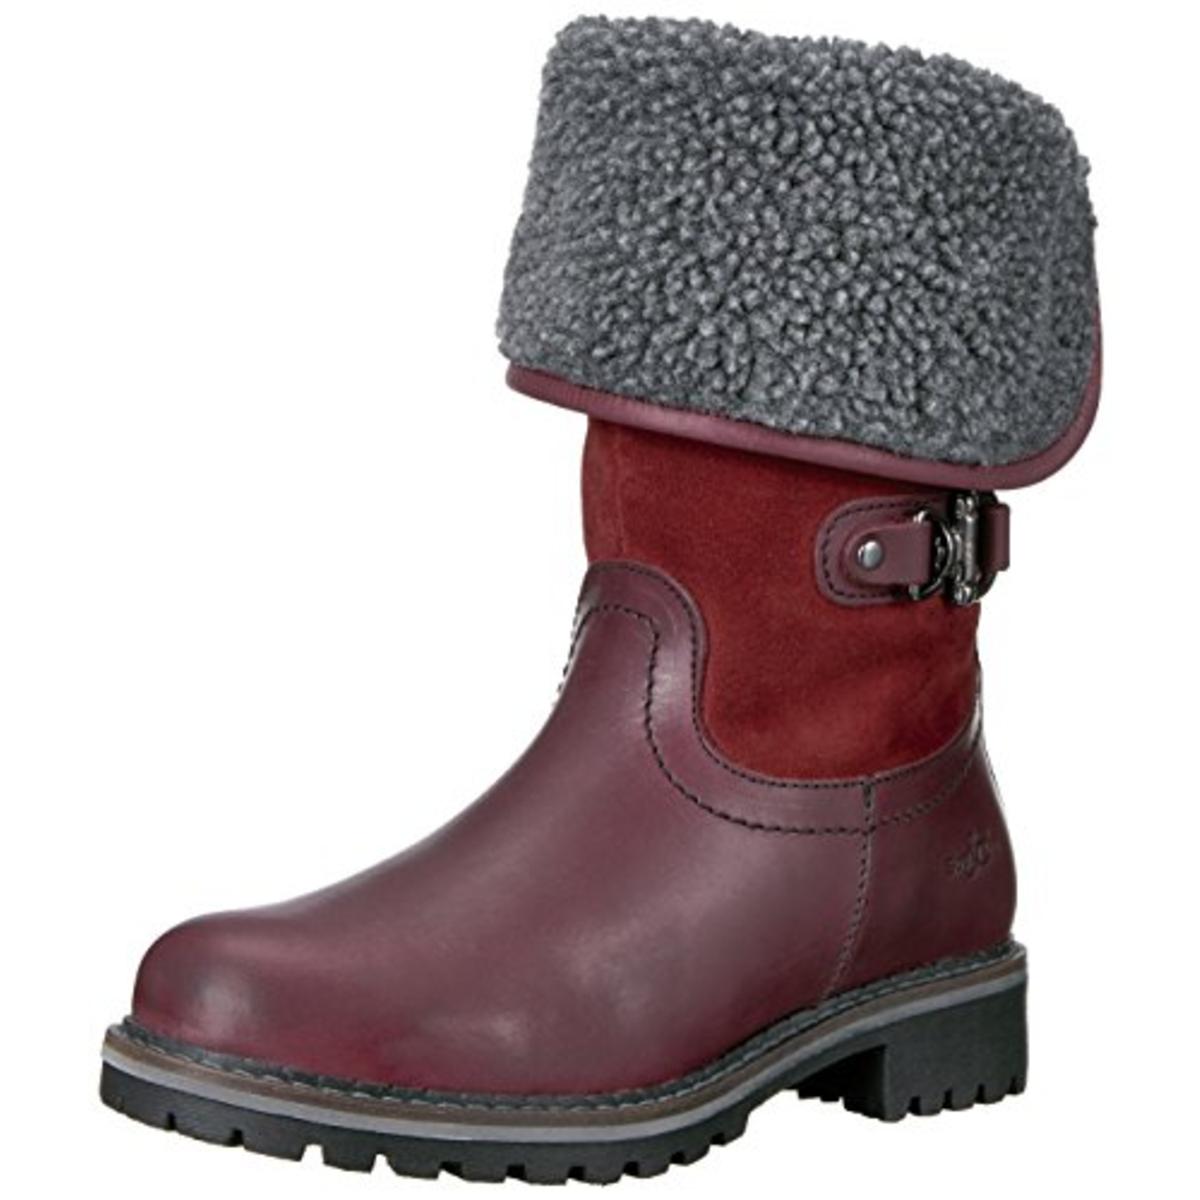 Bos. & Co. 1849 Womens Hillory Leather Wool Waterproof Snow Boots Shoes ...